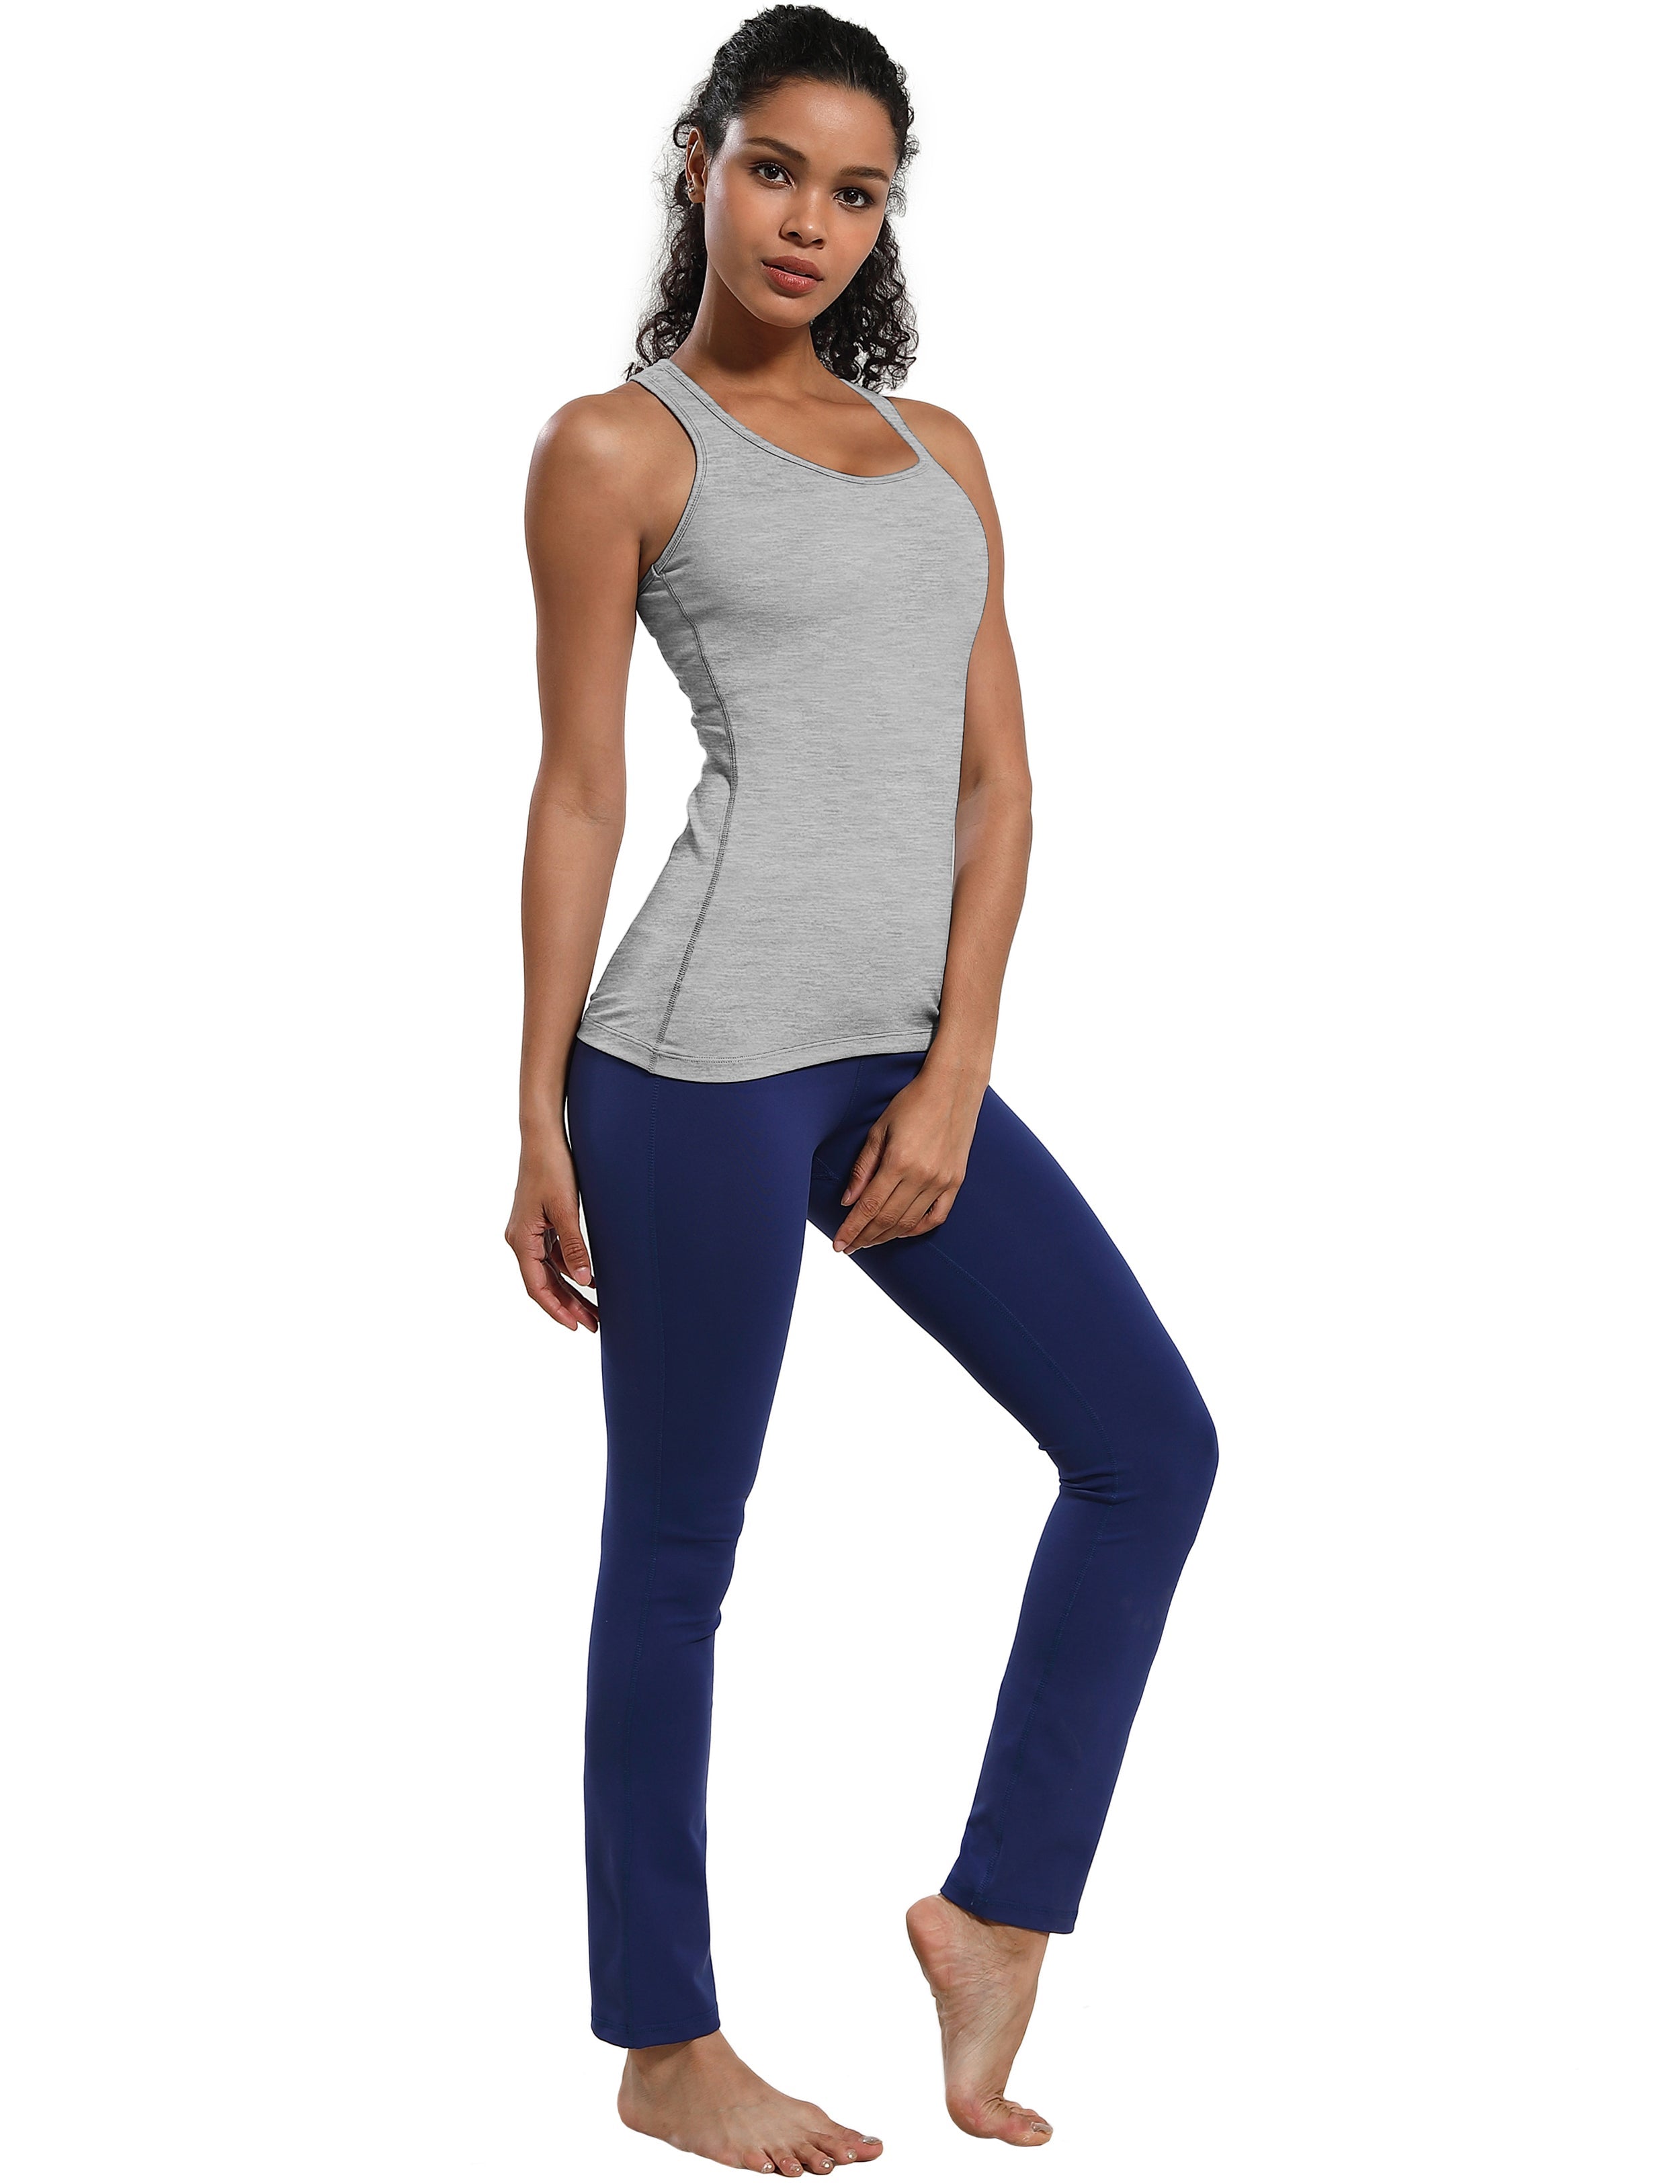 Racerback Athletic Tank Tops heathergray 92%Nylon/8%Spandex(Cotton Soft) Designed for Pilates Tight Fit So buttery soft, it feels weightless Sweat-wicking Four-way stretch Breathable Contours your body Sits below the waistband for moderate, everyday coverage